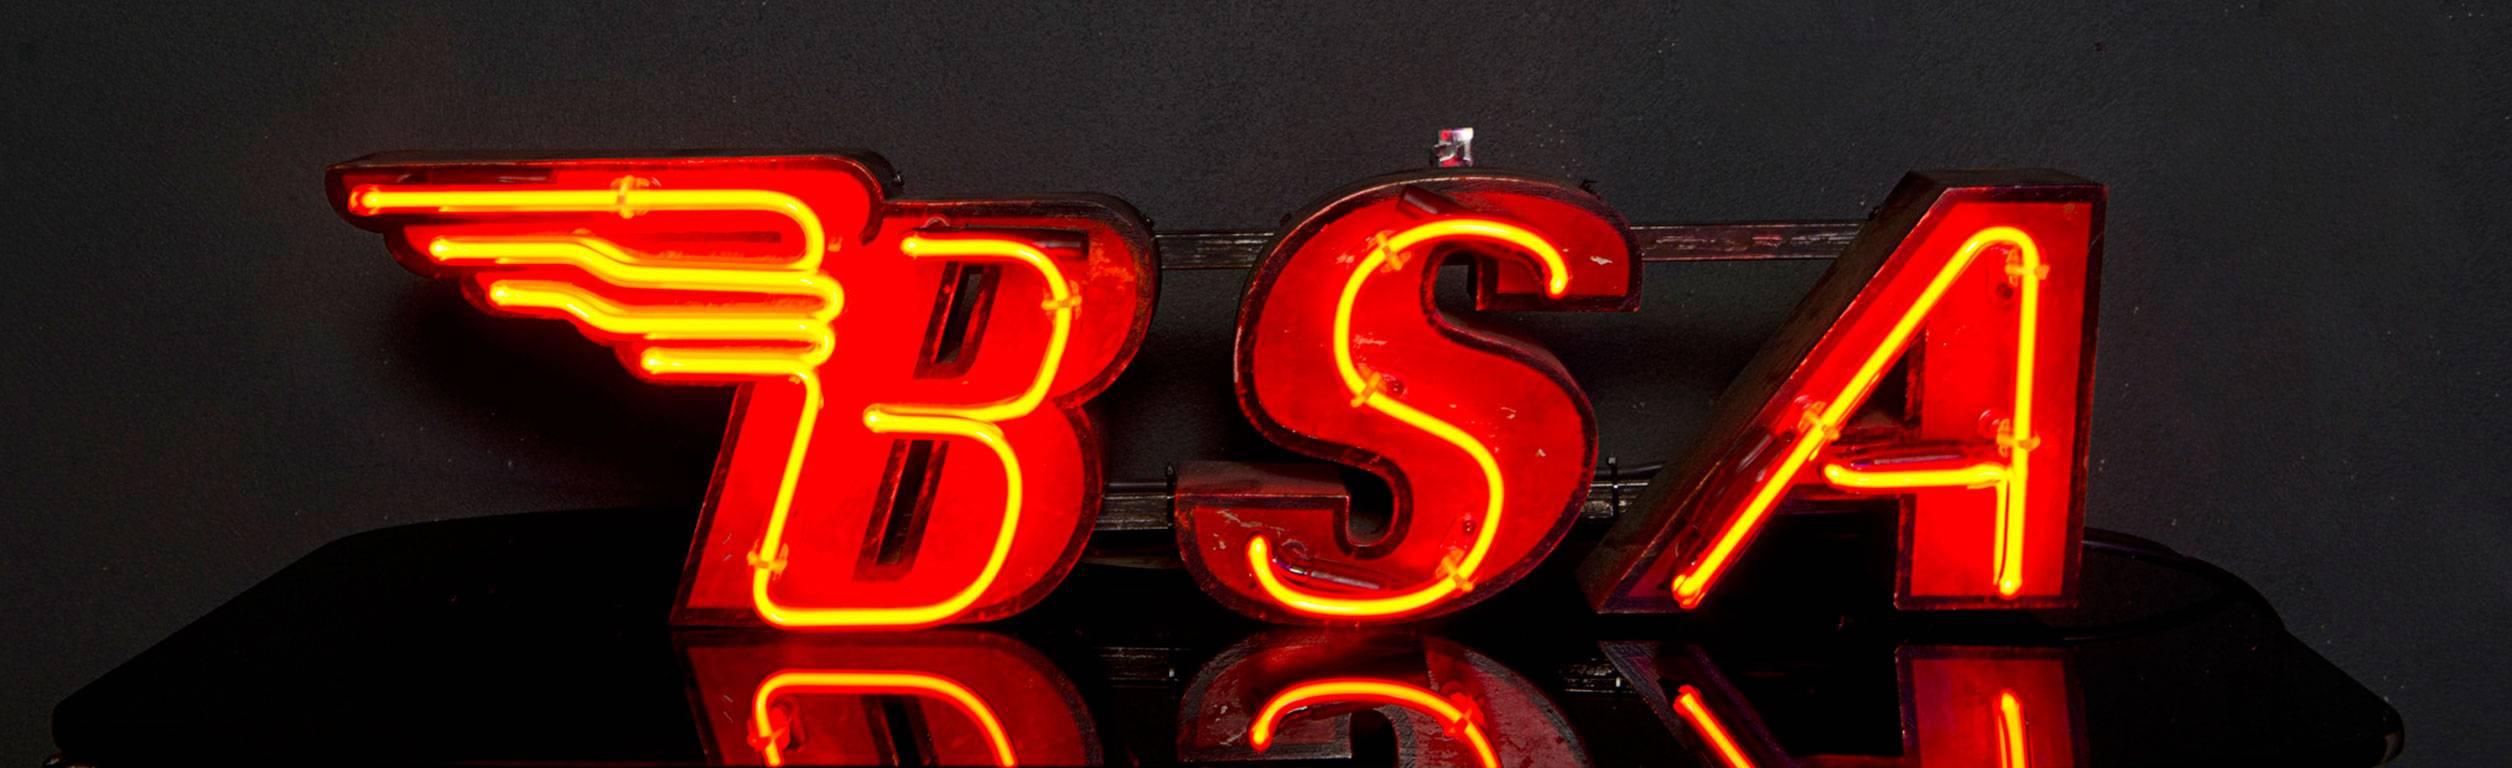 God's Own Junkyard designed Neon Artwork. 

Built up "BSA" Vintage Sign with Red Neon Front.

Lights of Soho present... God's Own Junkyard. New & used neon fantasies, salvaged signs, vintage neons, old movie props and retro